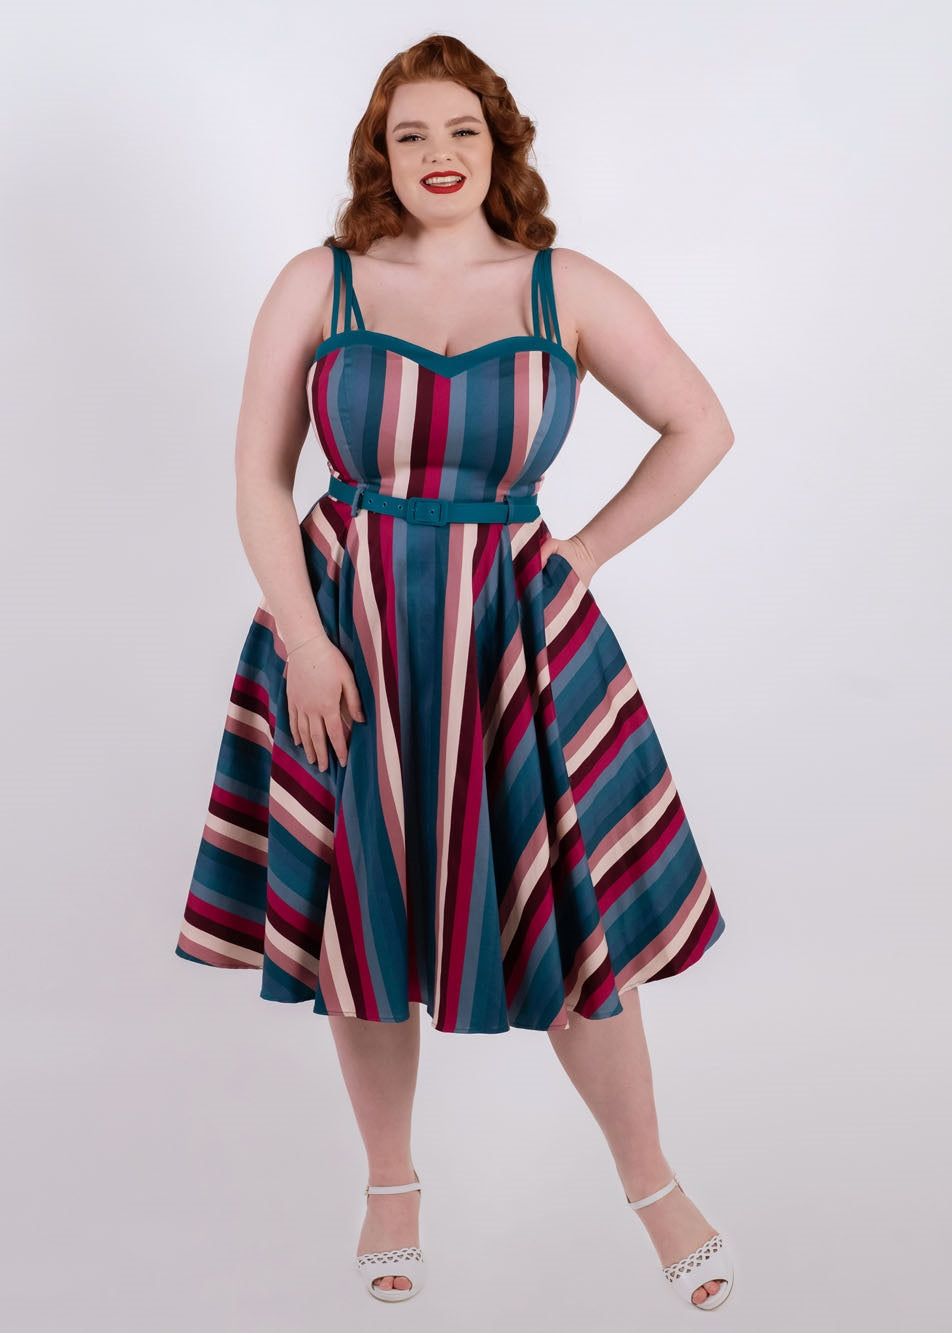 Redhead vintage pinup model smiling in red lipstick and a stripey blue, pink and white swing dress standing with one hand in her pocket